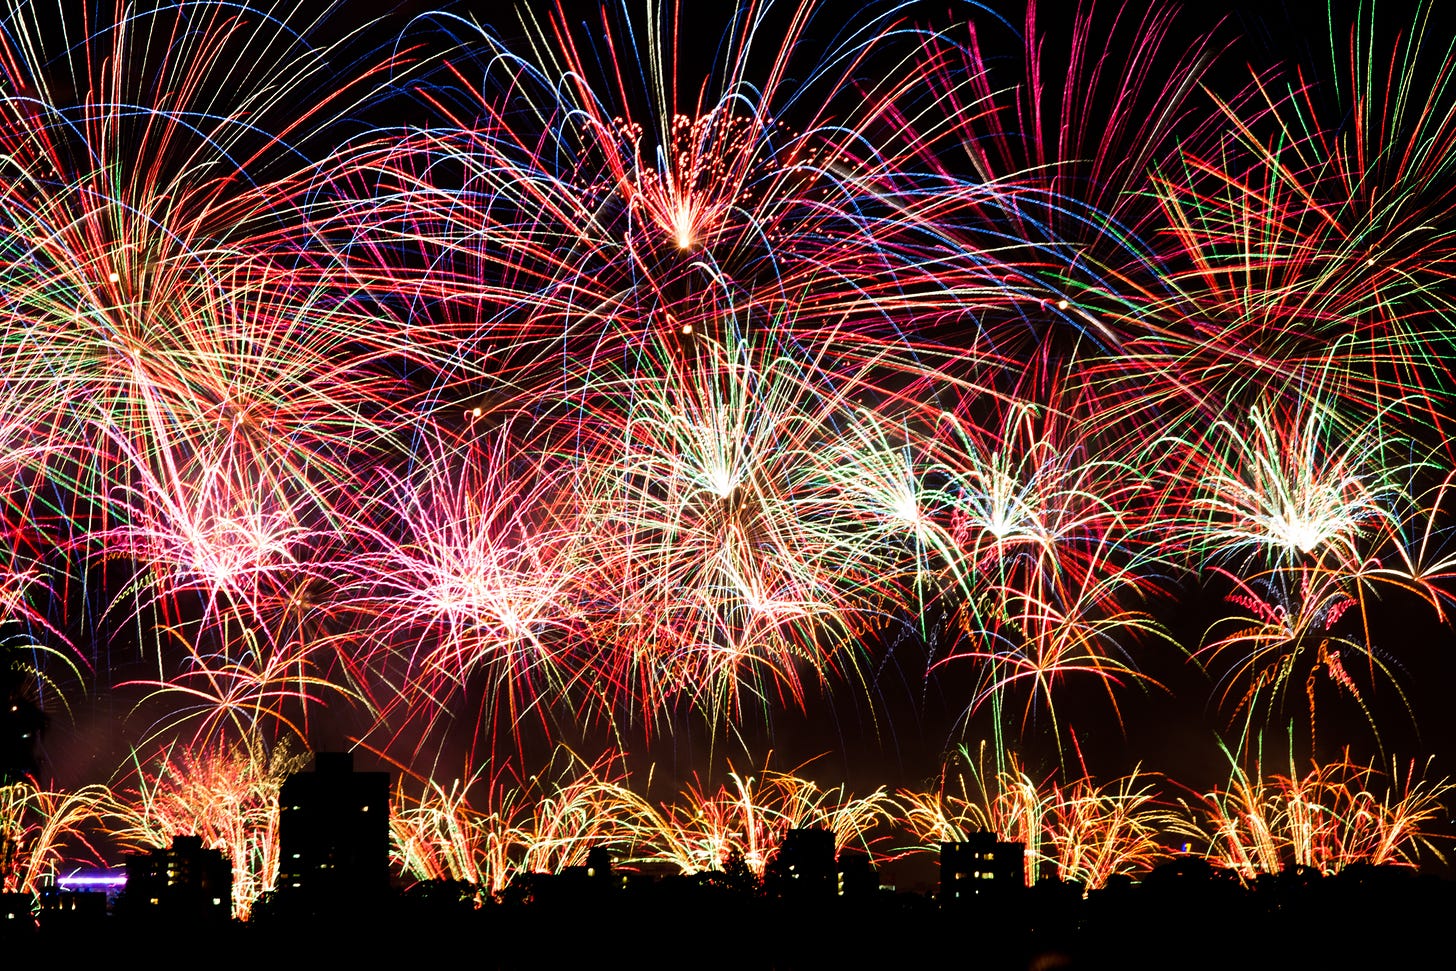 http://ipicturee.com/wp-content/uploads/2013/12/Download-Awesome-Fireworks-HD-Wallpaper.jpg